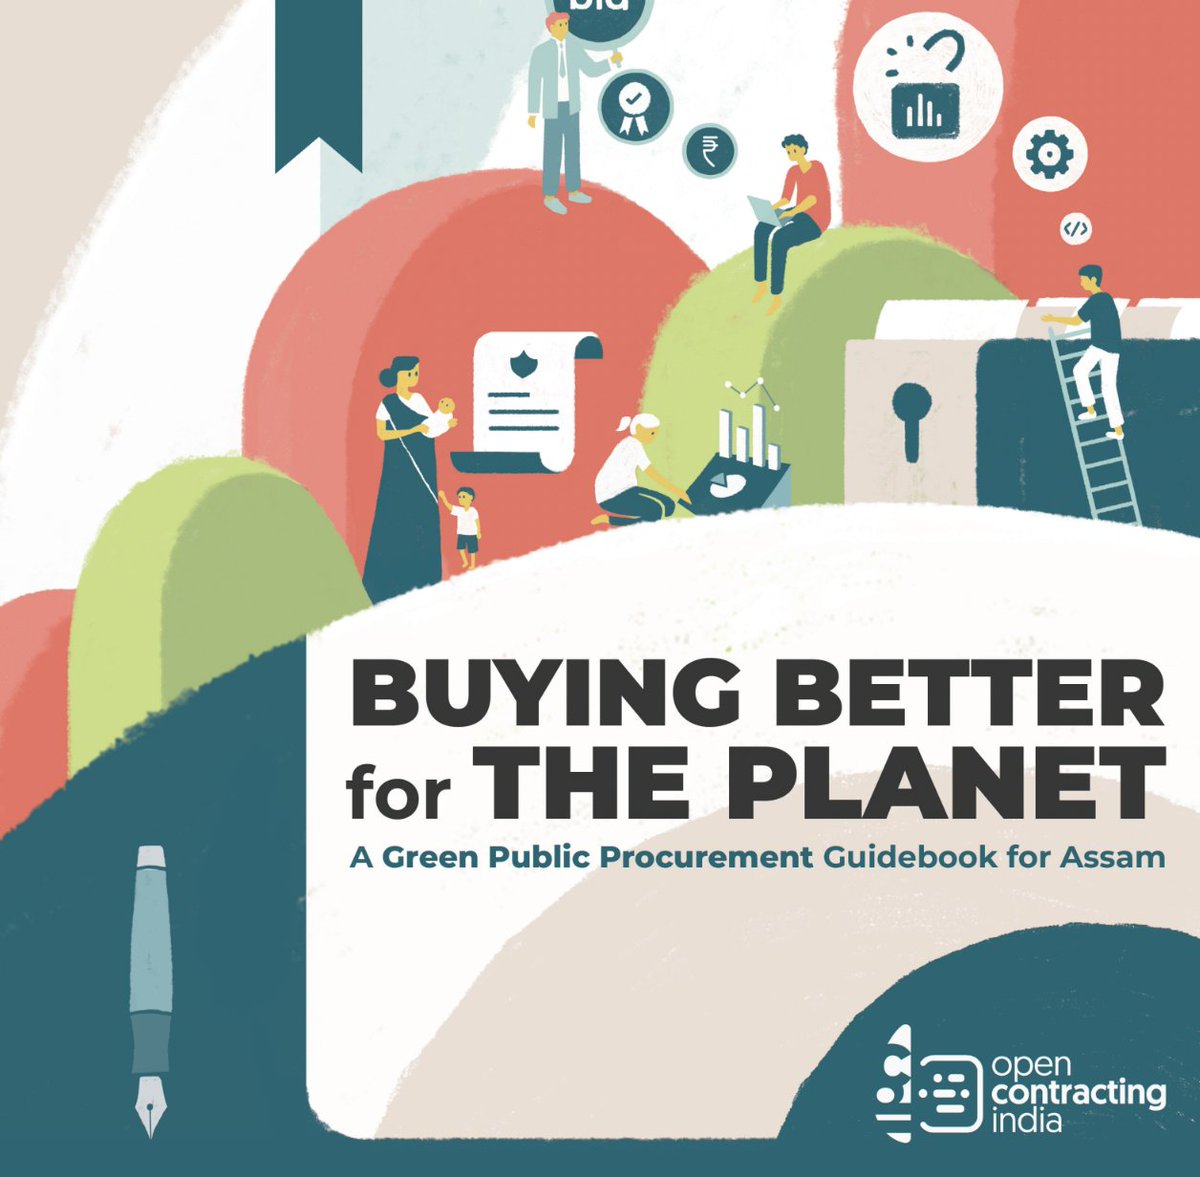 This week, our partners at @CivicDataLab published their new green procurement guidebook “Buying Better for the Planet,” based on their work in Assam, India Check it out here drive.google.com/file/d/1mSFCEn…. We look forward to its adoption in other states in India & beyond! #GPP